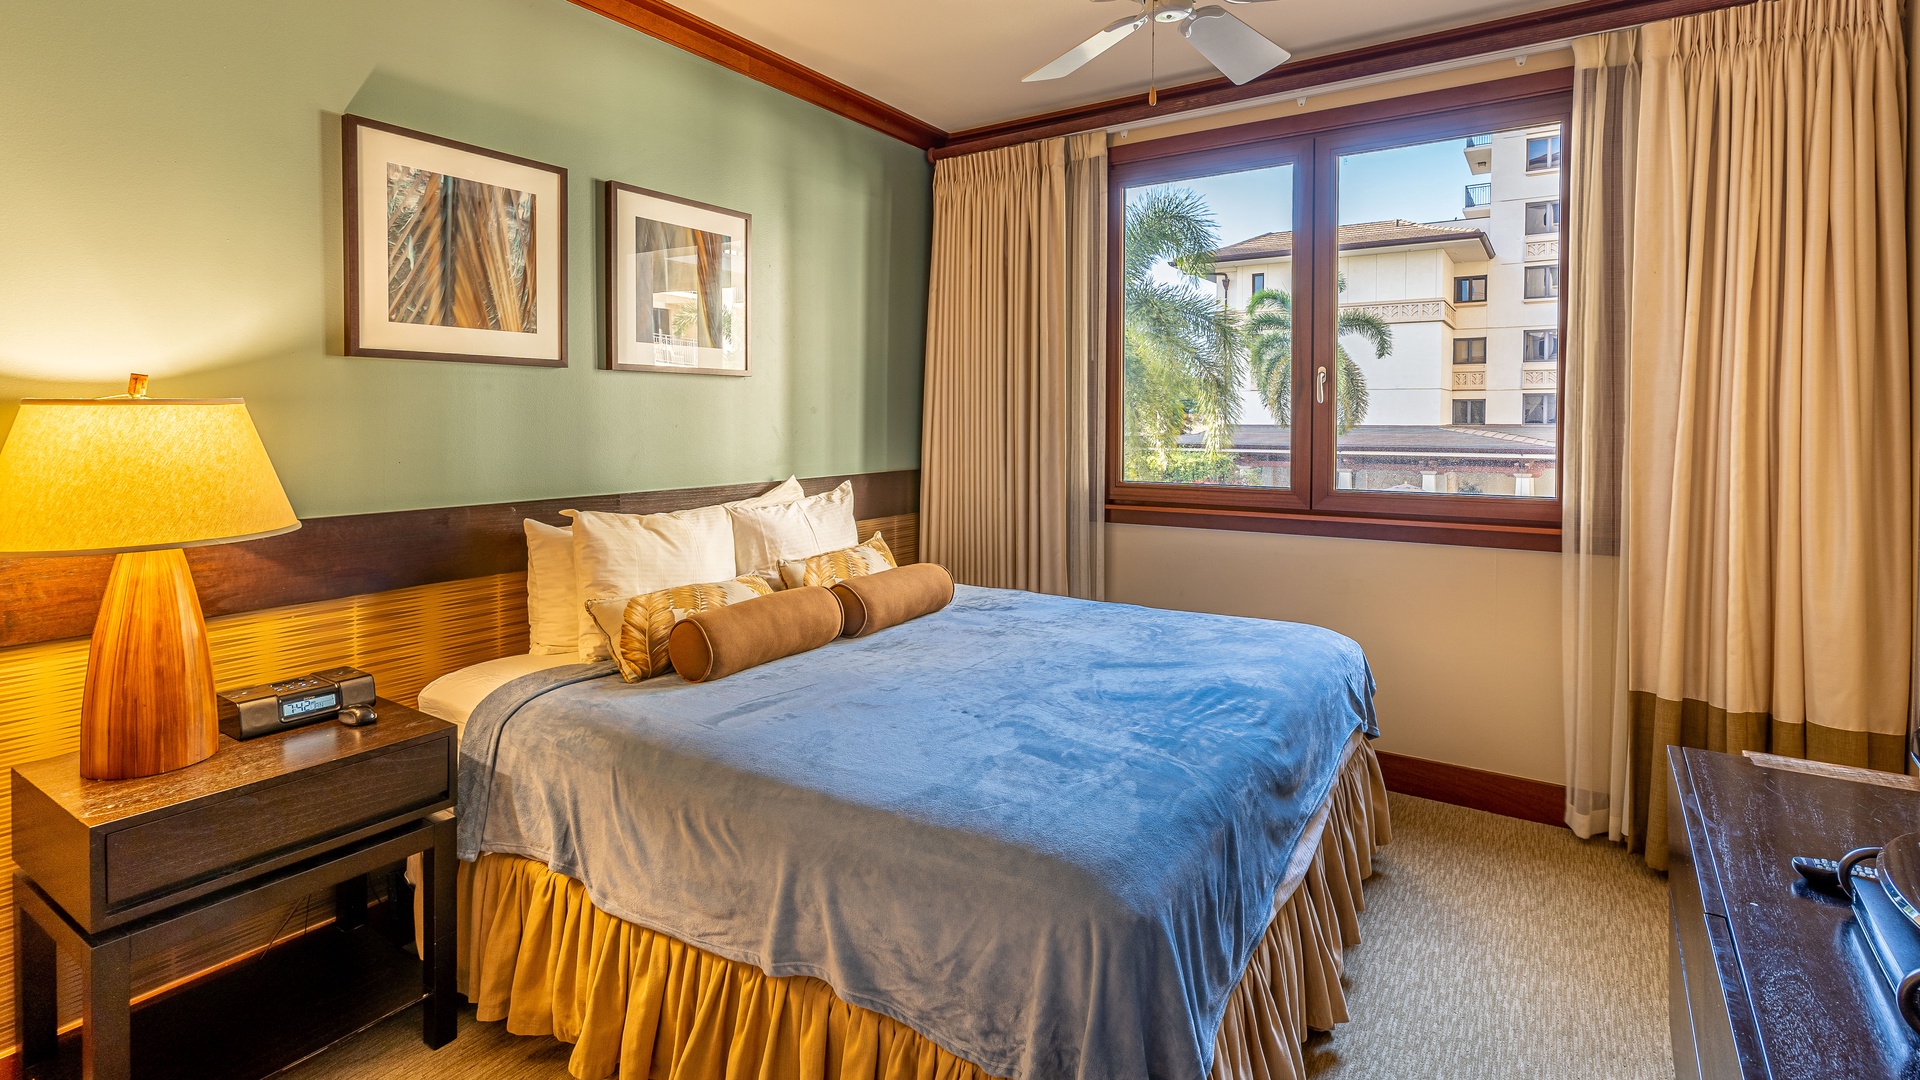 Kapolei Vacation Rentals, Ko Olina Beach Villas O224 - The second guest bedroom showing the twin beds converted to a king bed.